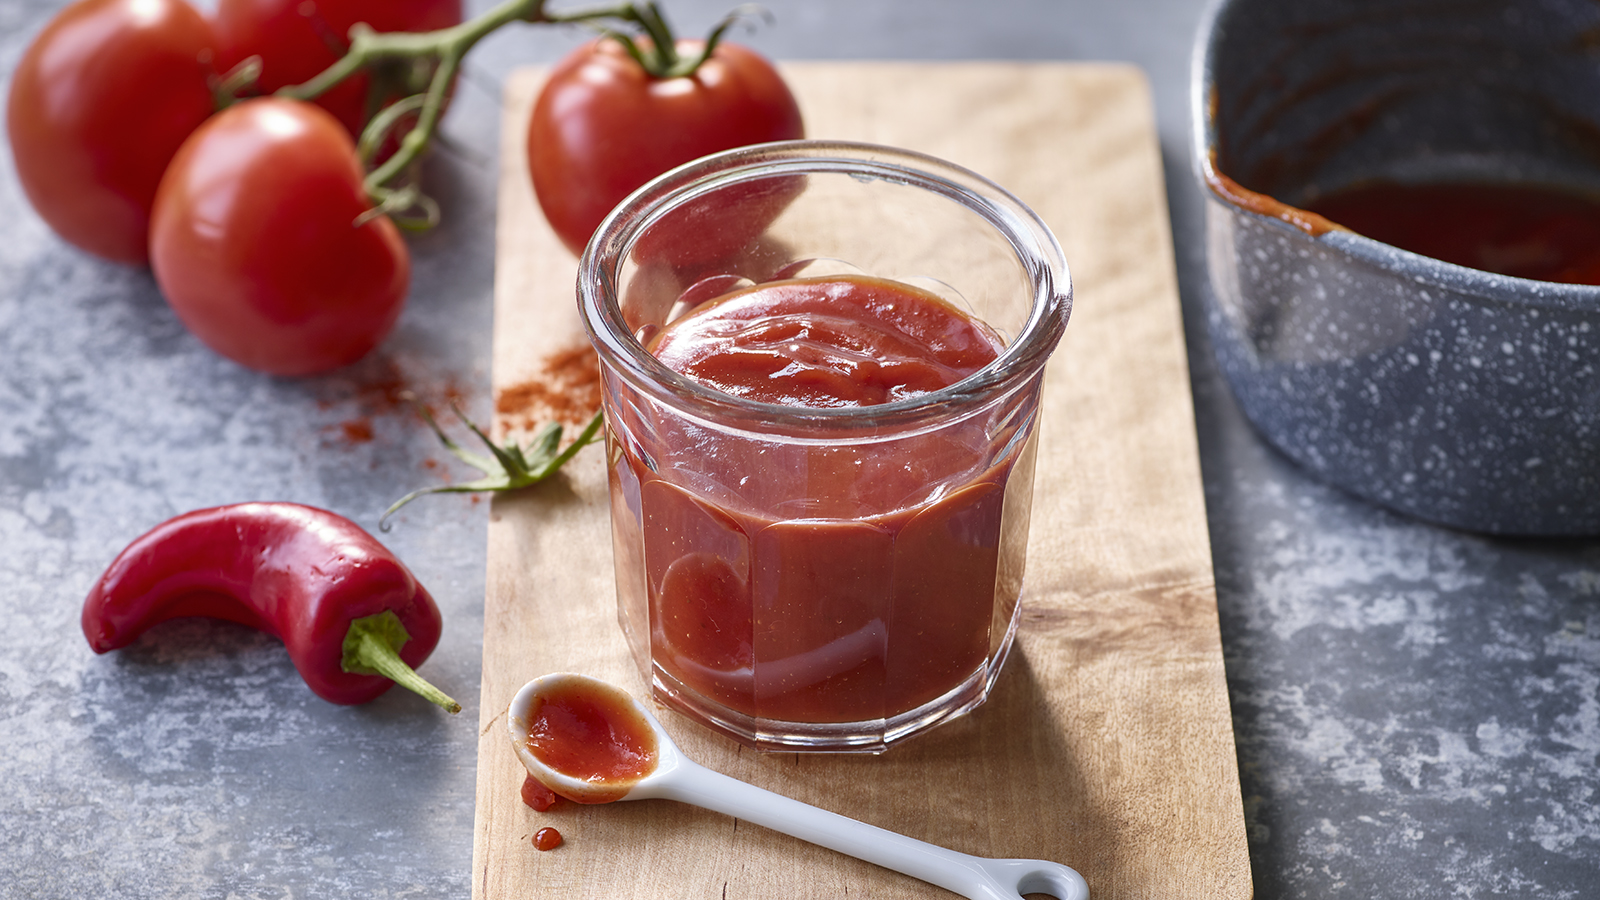 Make your own Tomato Ketchup